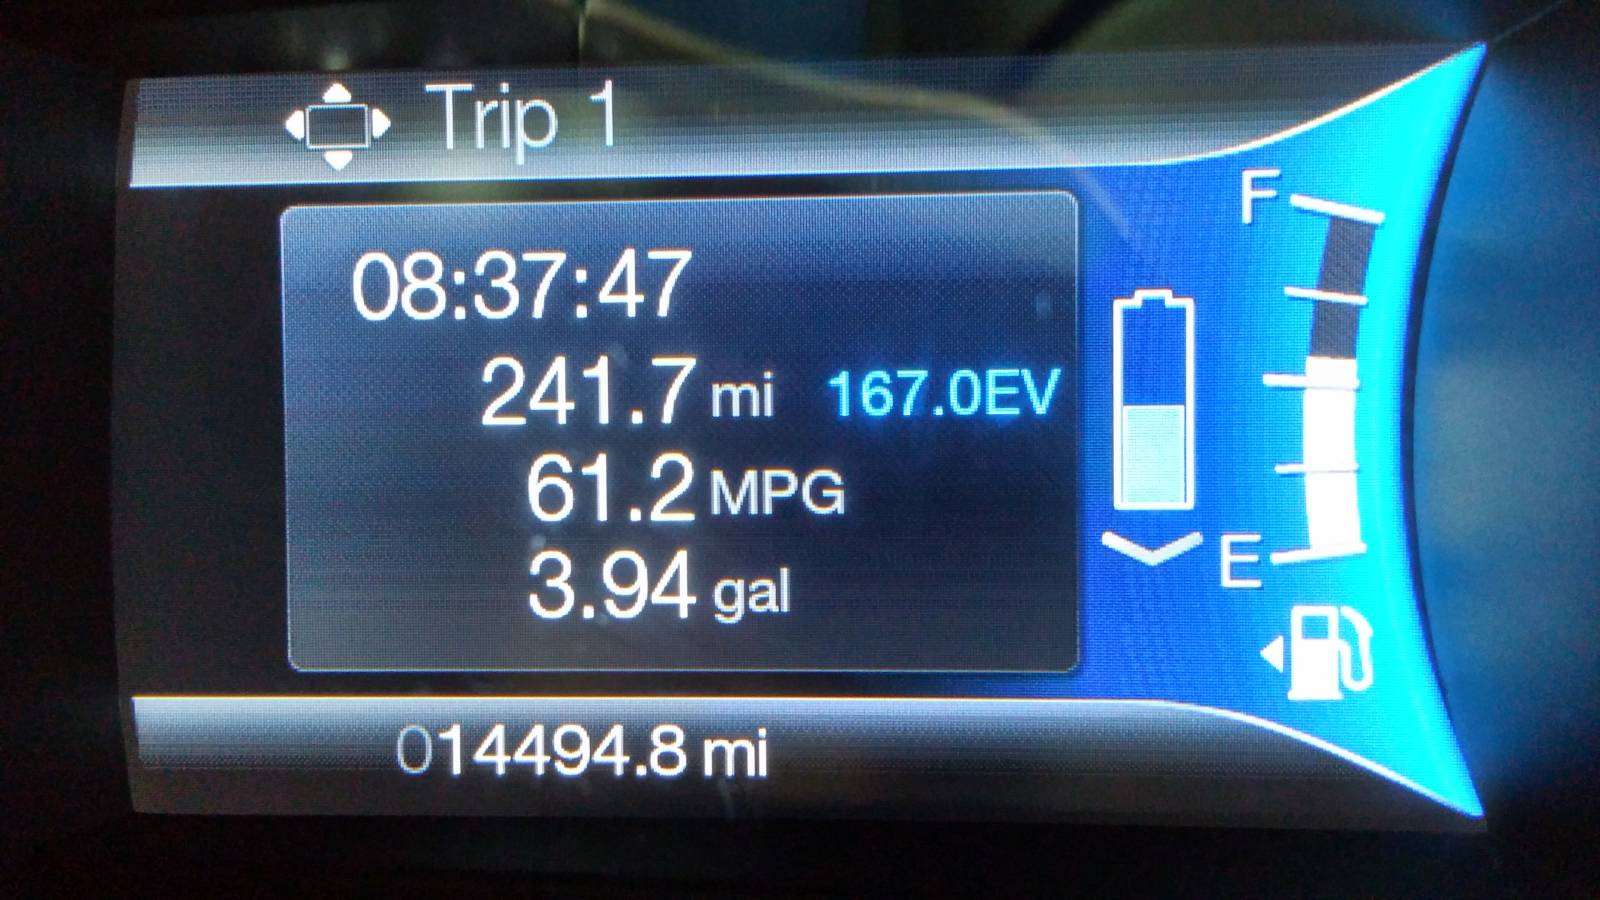 So close to 62 MPG on this tank average